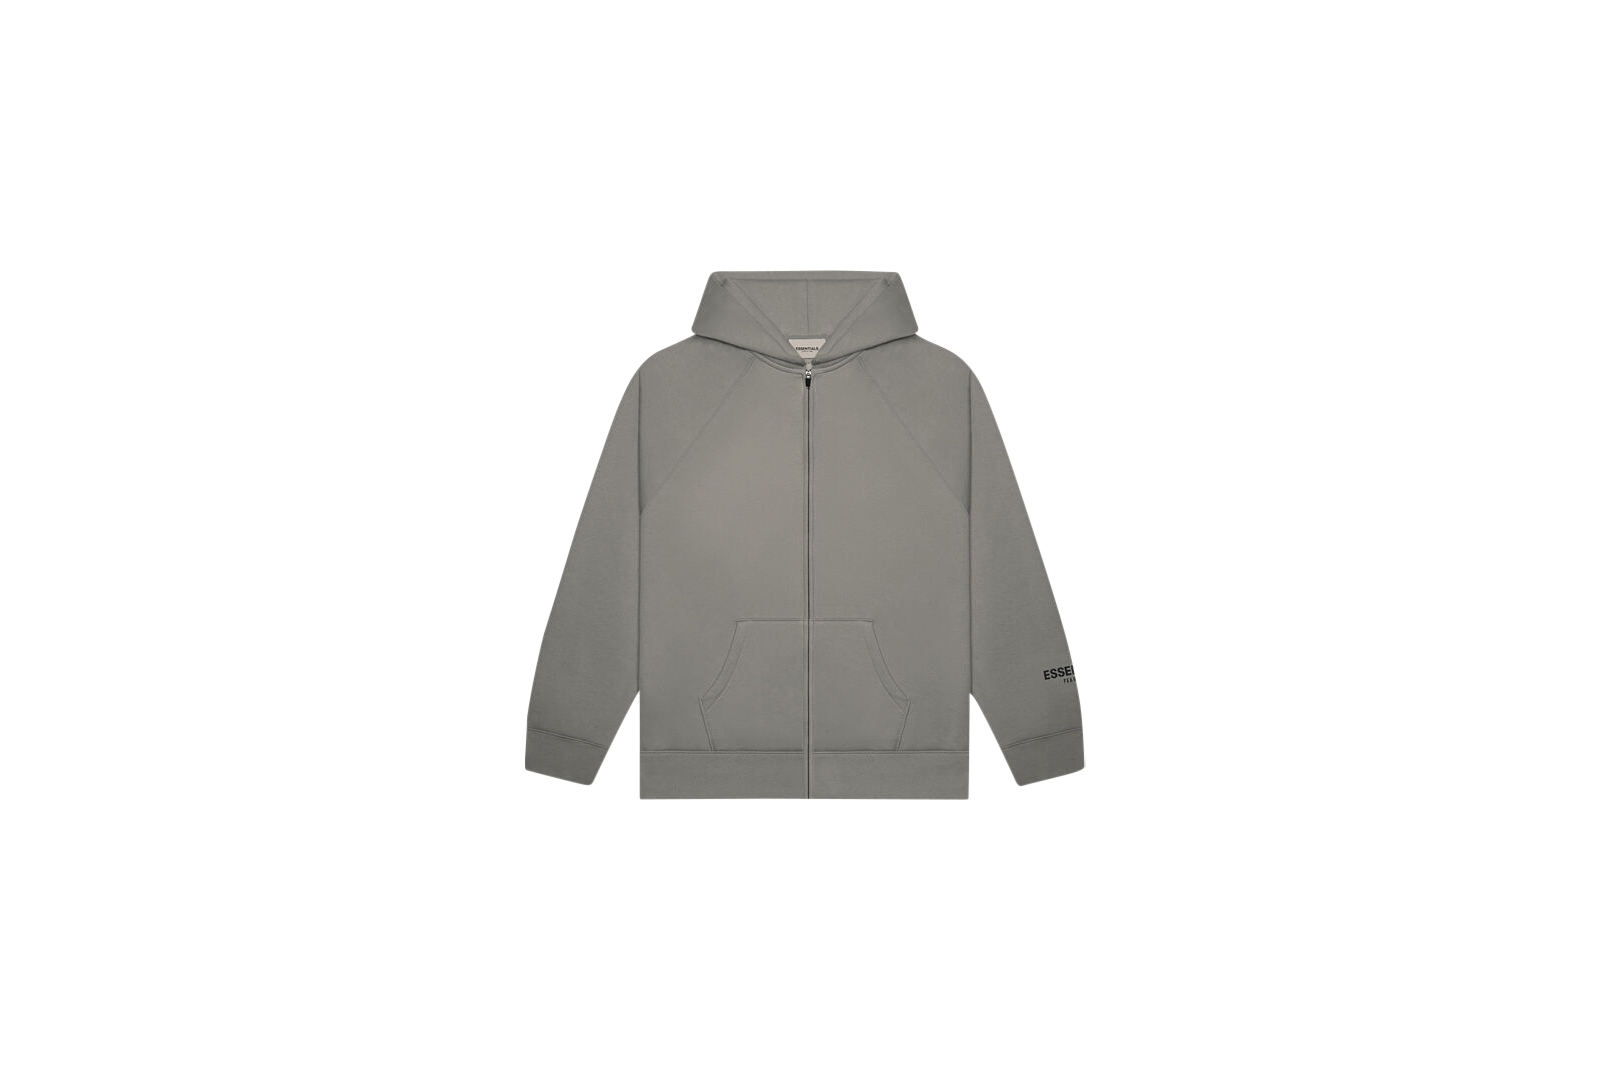 Fear of God Essentials 3D Silicon Applique Full Zip Up Hoodie Gray ...